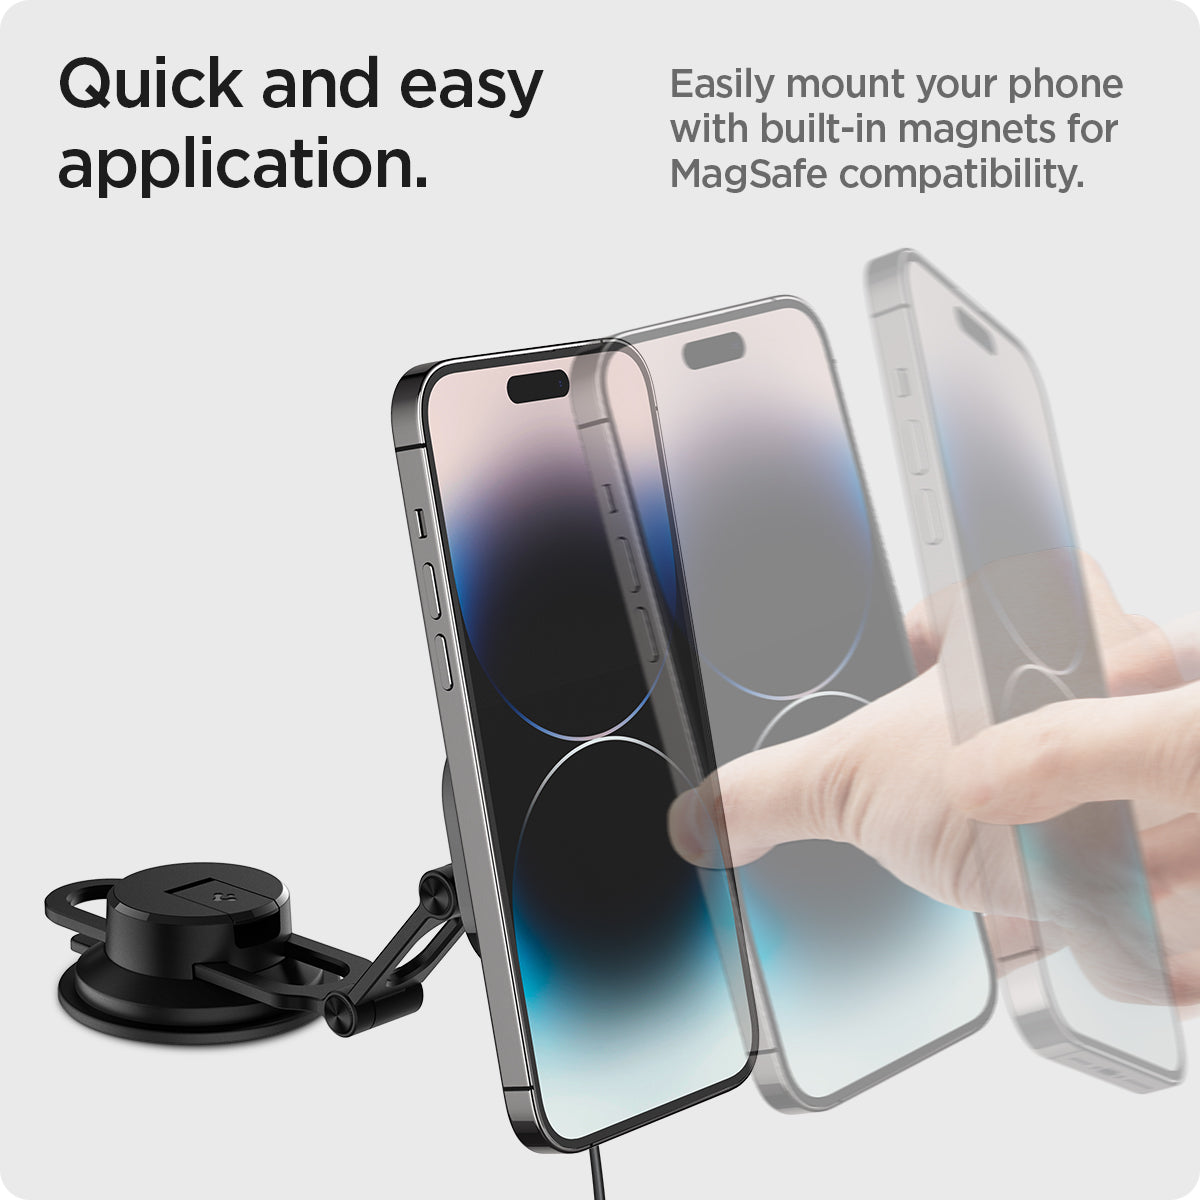 ACP04629 - OneTap Pro 3 Dashboard Car Mount ITS35W-3 (MagFit) in Black showing the Quick and easy application. Easily mount your phone with built-in magnets for MagSafe compatibility. A hand holding a device mounting it to a car mount